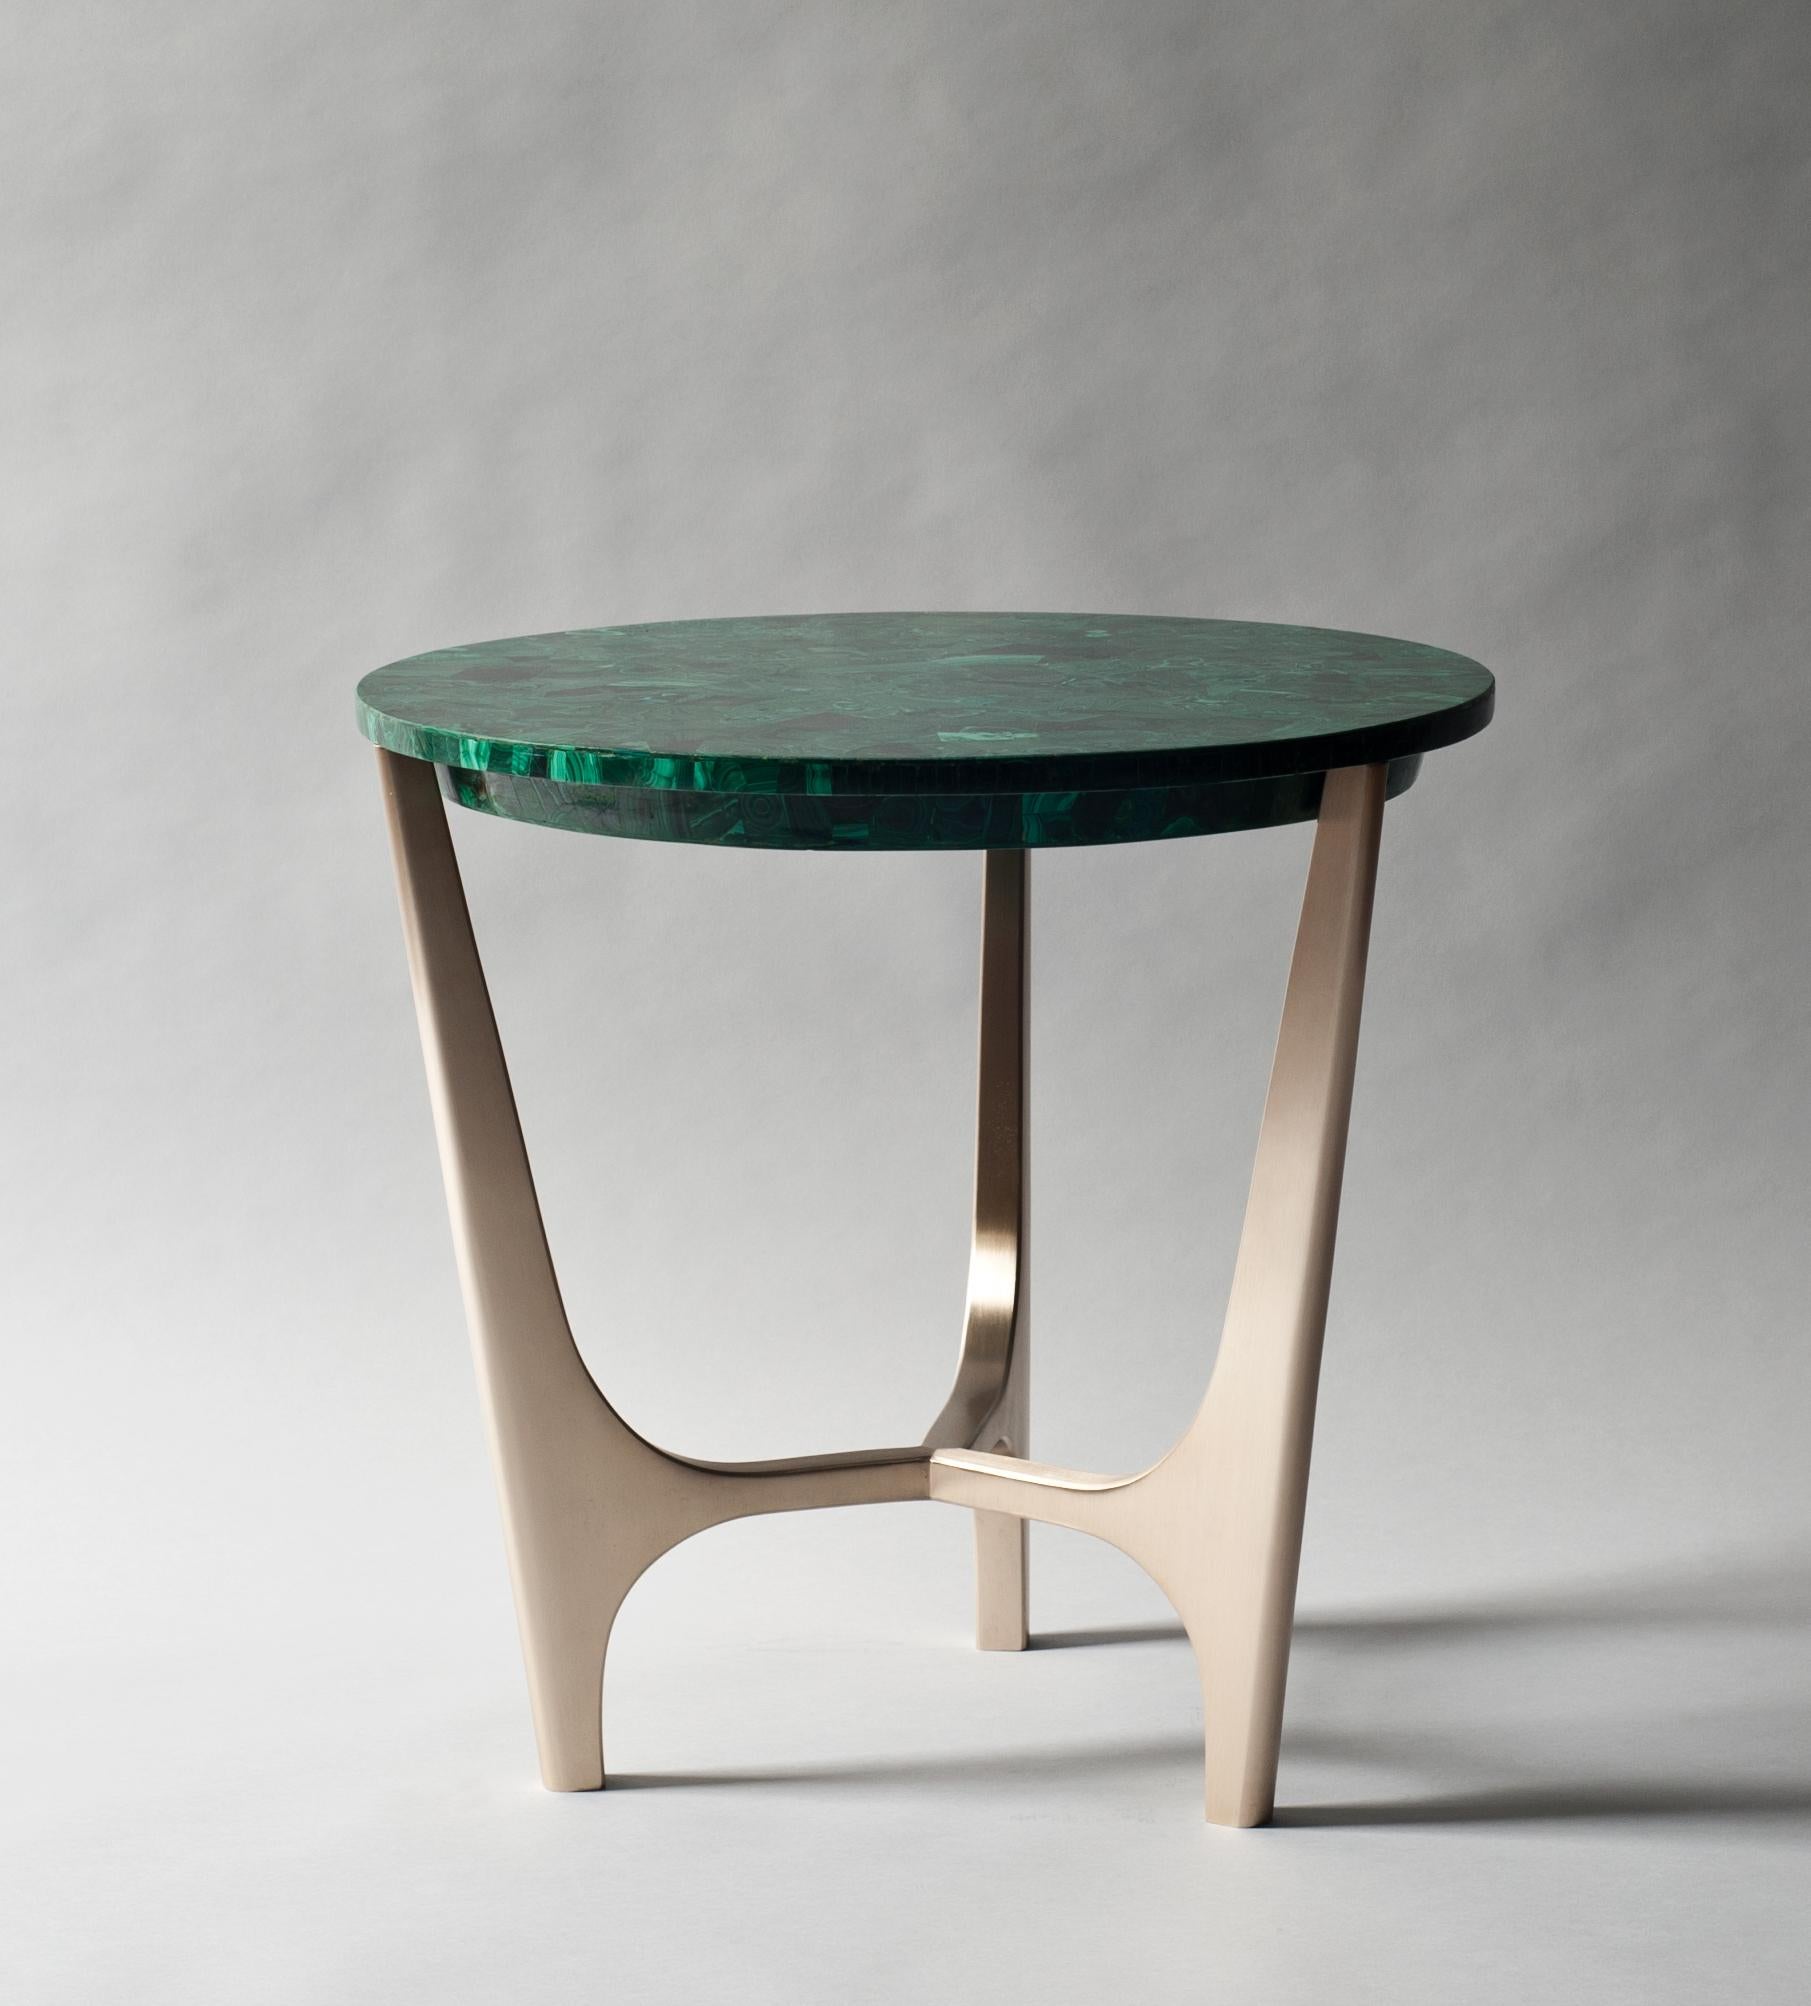 Athena side table by DeMuro Das 
Dimensions: 57 x H 55.2 cm
Materials: Malachite - Polished (Random) tabletop
 Solid bronze - Satin legs 

Dimensions and finishes can be customized

DeMuro Das is an international design firm and the aesthetic